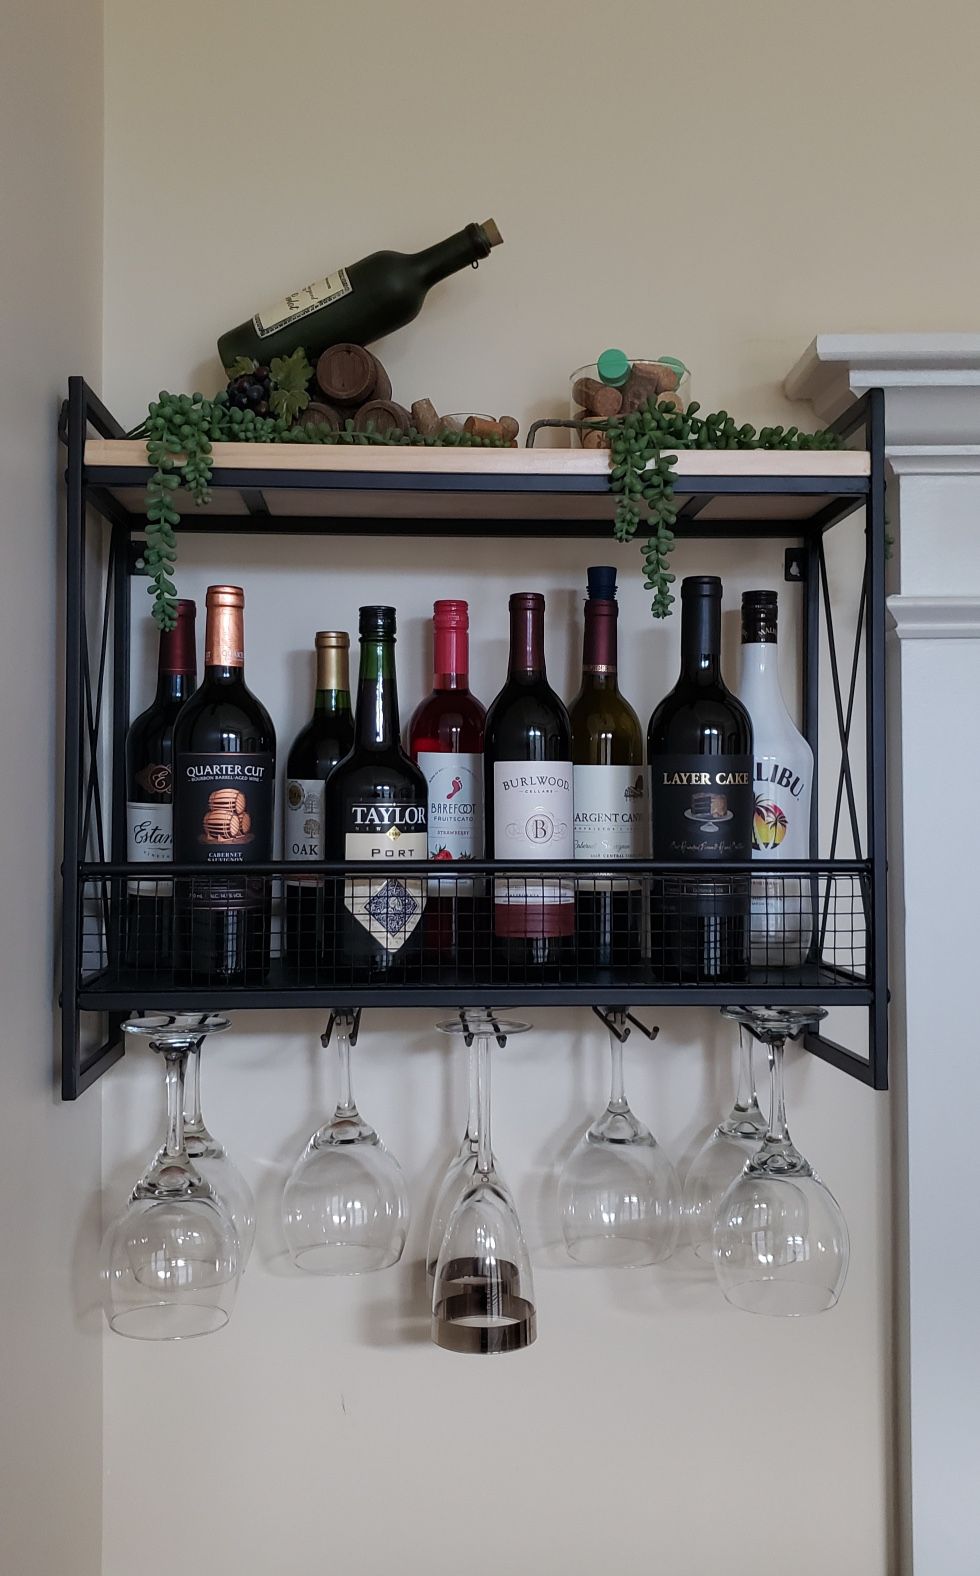 Quality Sells Wall Mount Wine Too Rack - 10 Stem Glass Holder - Metal/Wood Design - Mesh Addition - Stores up to 9 Wine Bottles